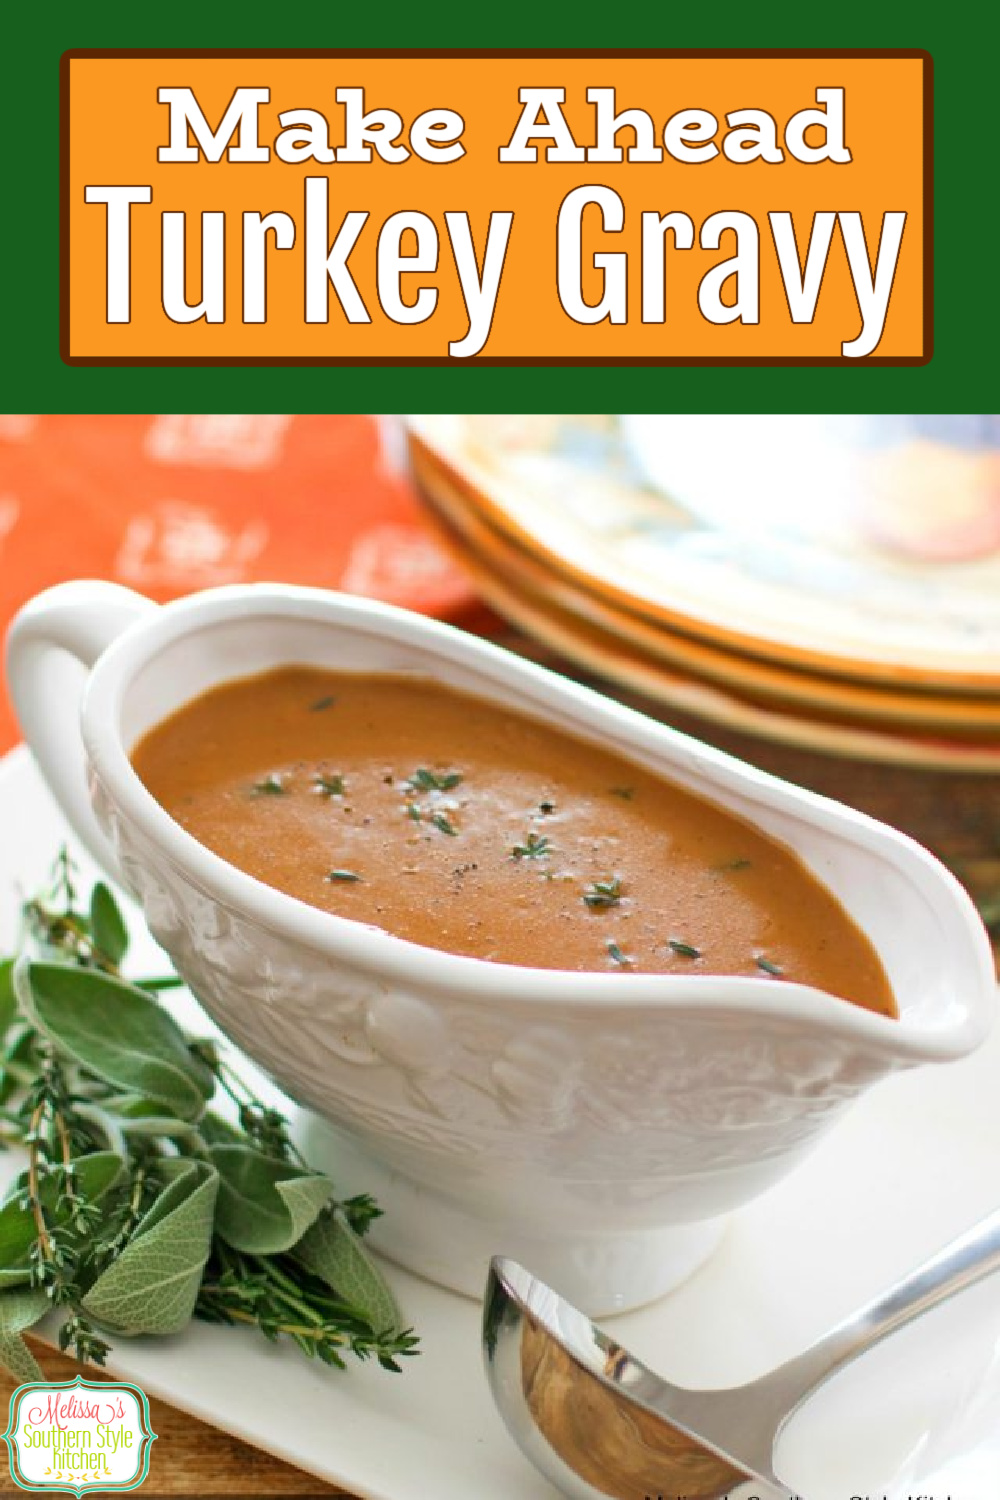 Take the stress out of Thanksgiving and make this spectacular Turkey Gravy in advance #turkeygravy #turkey #gravy #makeaheadgravy #gravyrecipes #turkey #turkeyrecipes #thanksgivingrecipes #thanksgiving #fall #fallrecipes #soujthernfood #southernrecipes via @melissasssk